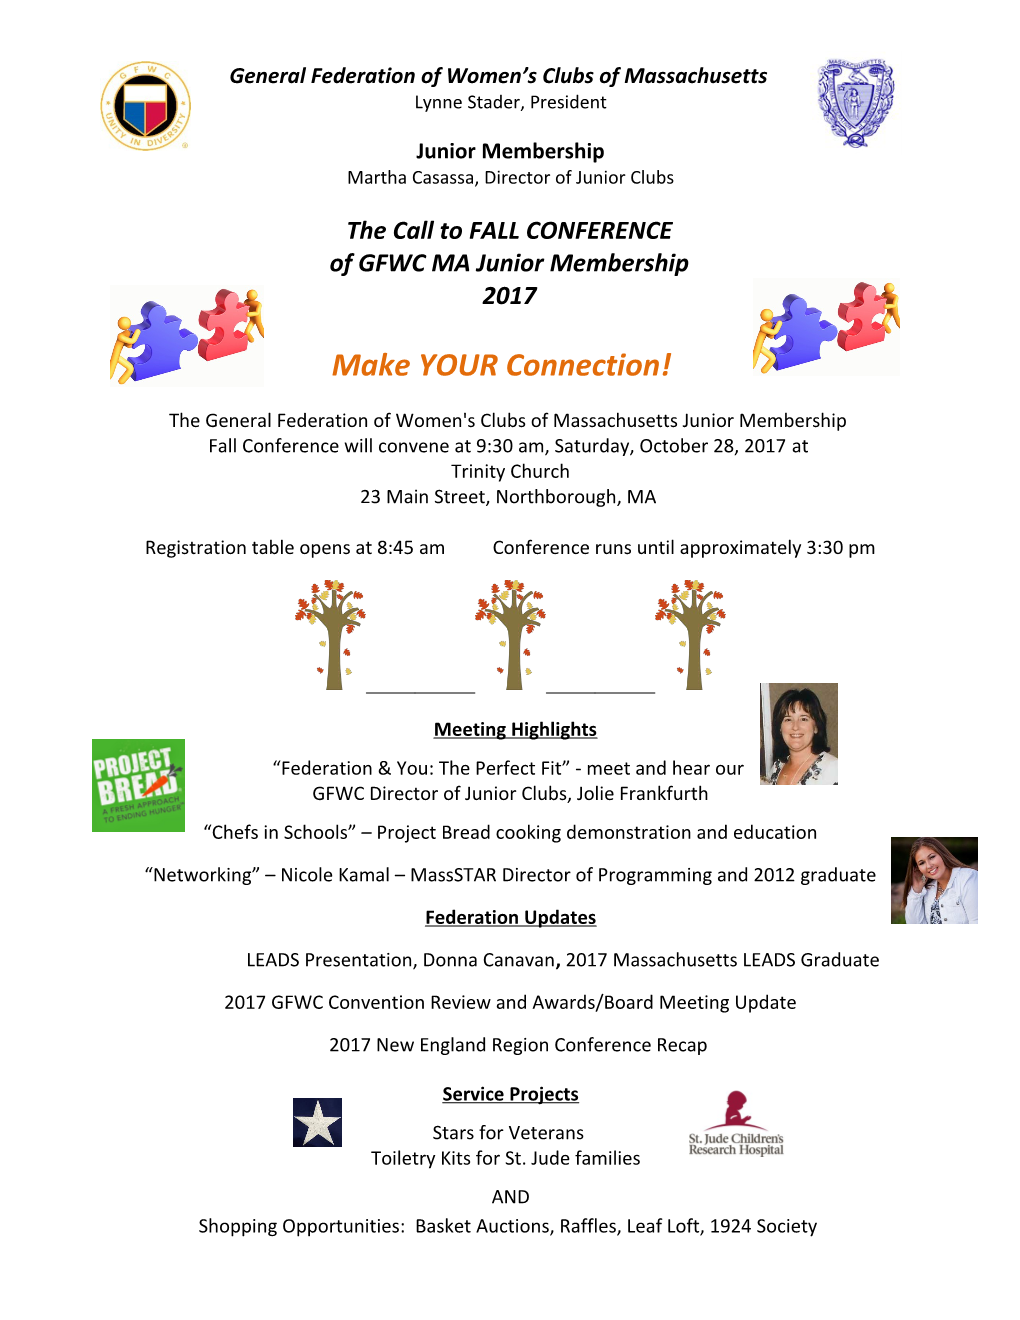 The Call to FALL CONFERENCE